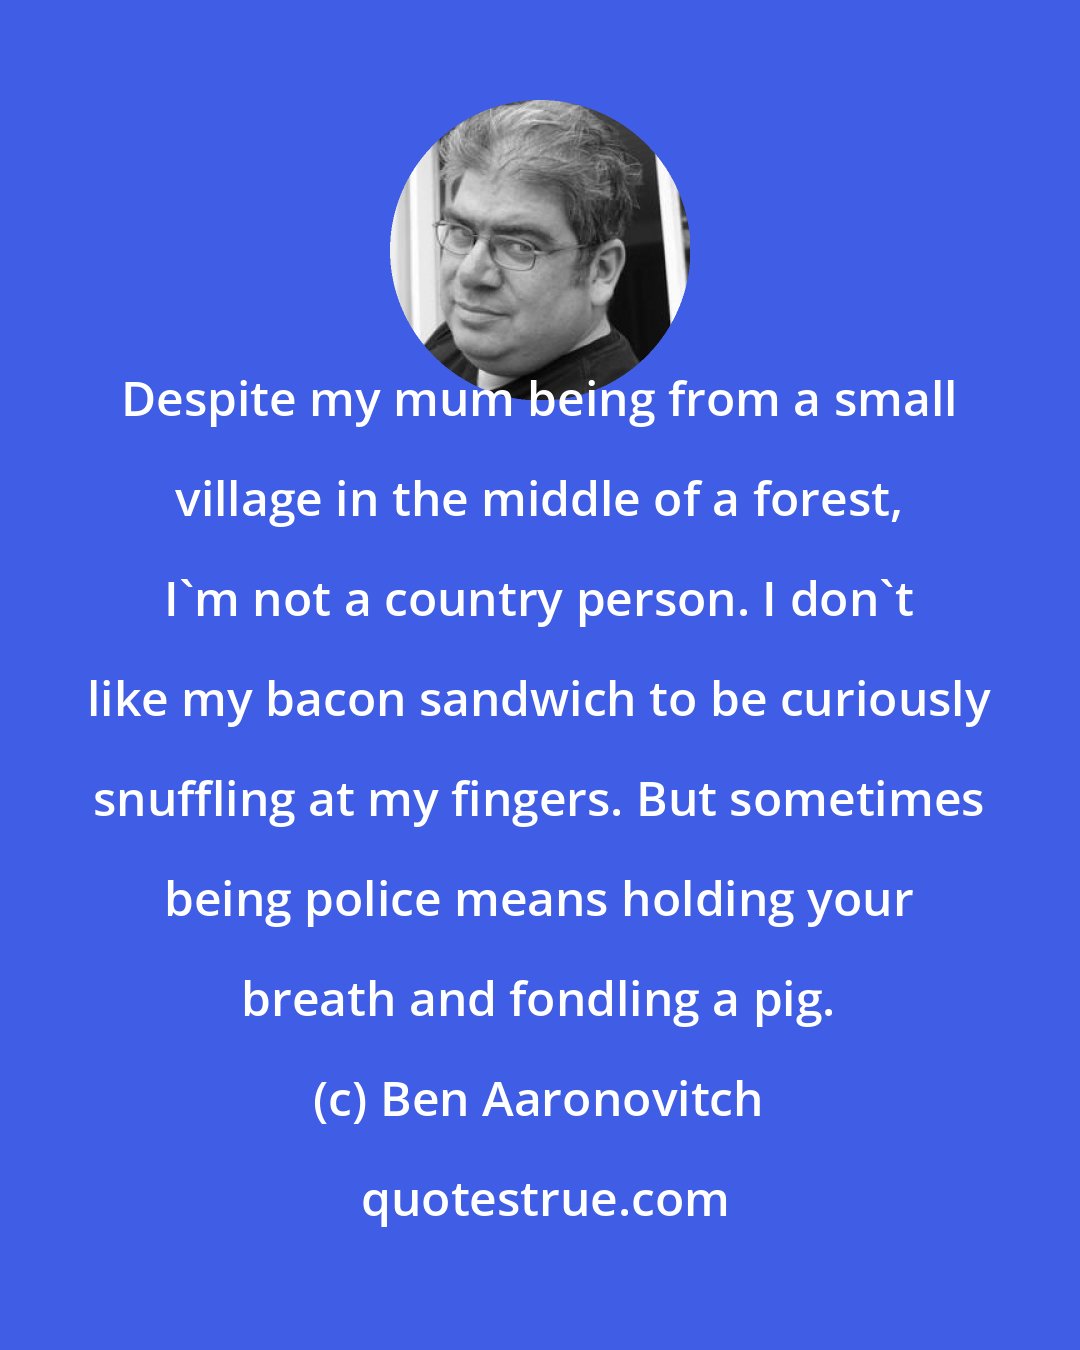 Ben Aaronovitch: Despite my mum being from a small village in the middle of a forest, I'm not a country person. I don't like my bacon sandwich to be curiously snuffling at my fingers. But sometimes being police means holding your breath and fondling a pig.